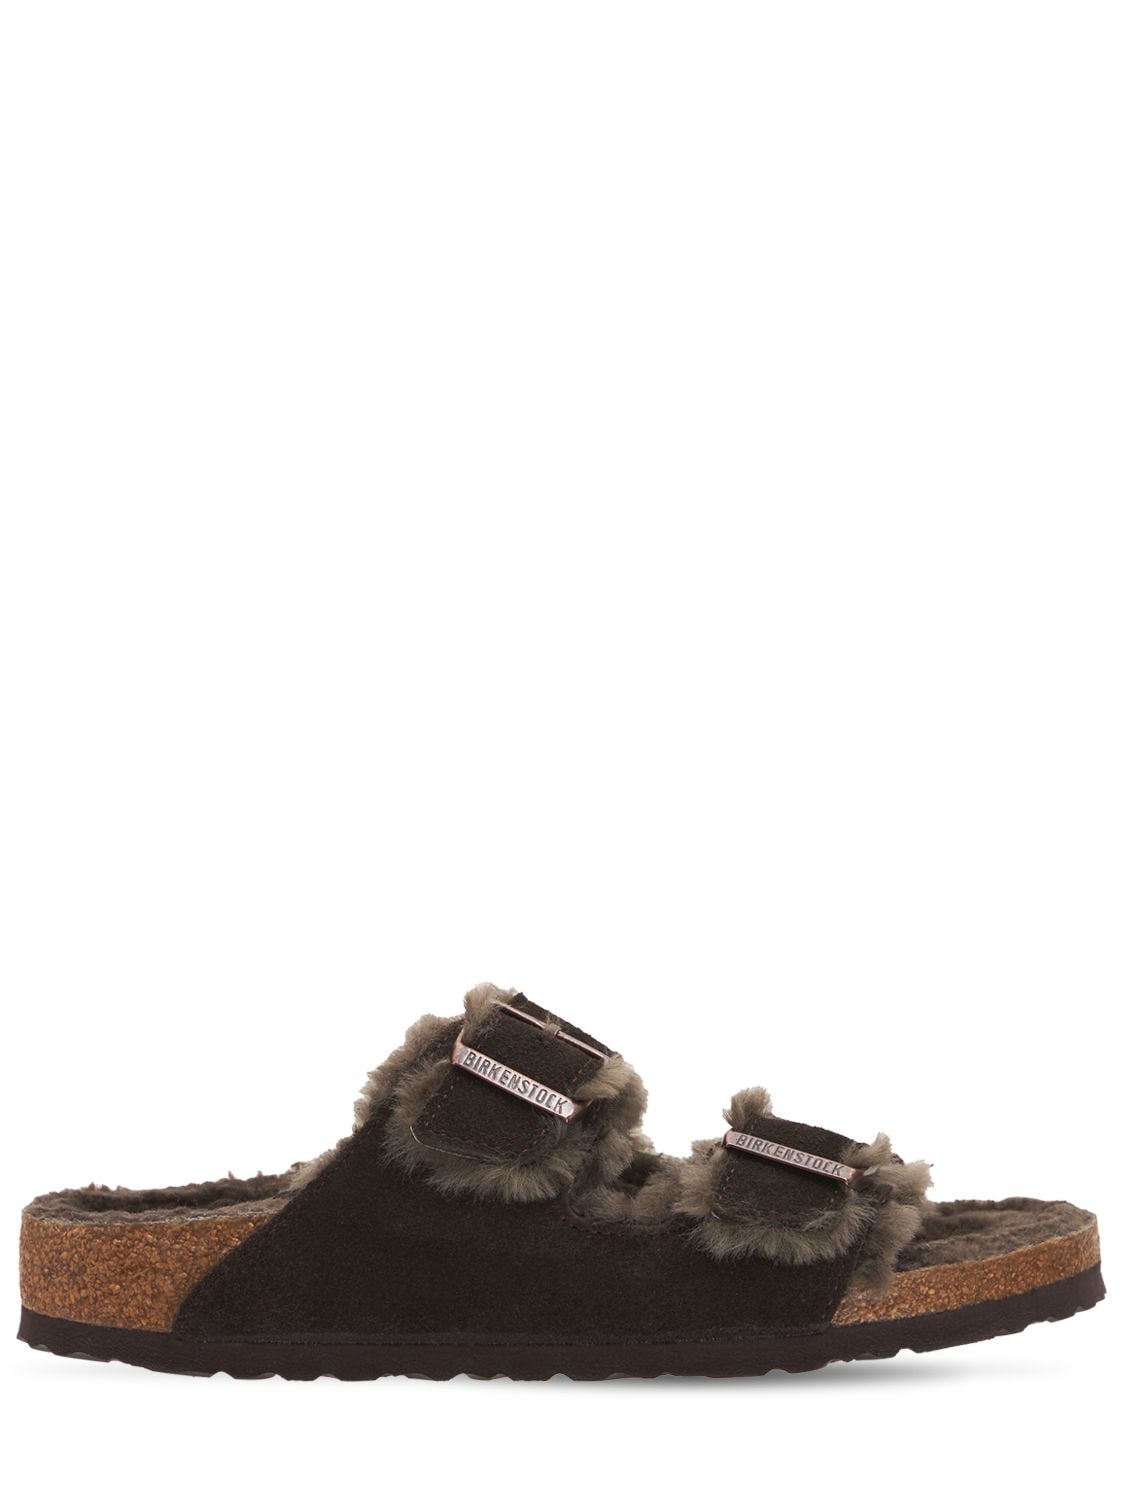 Image of Arizona Shearling & Suede Sandals